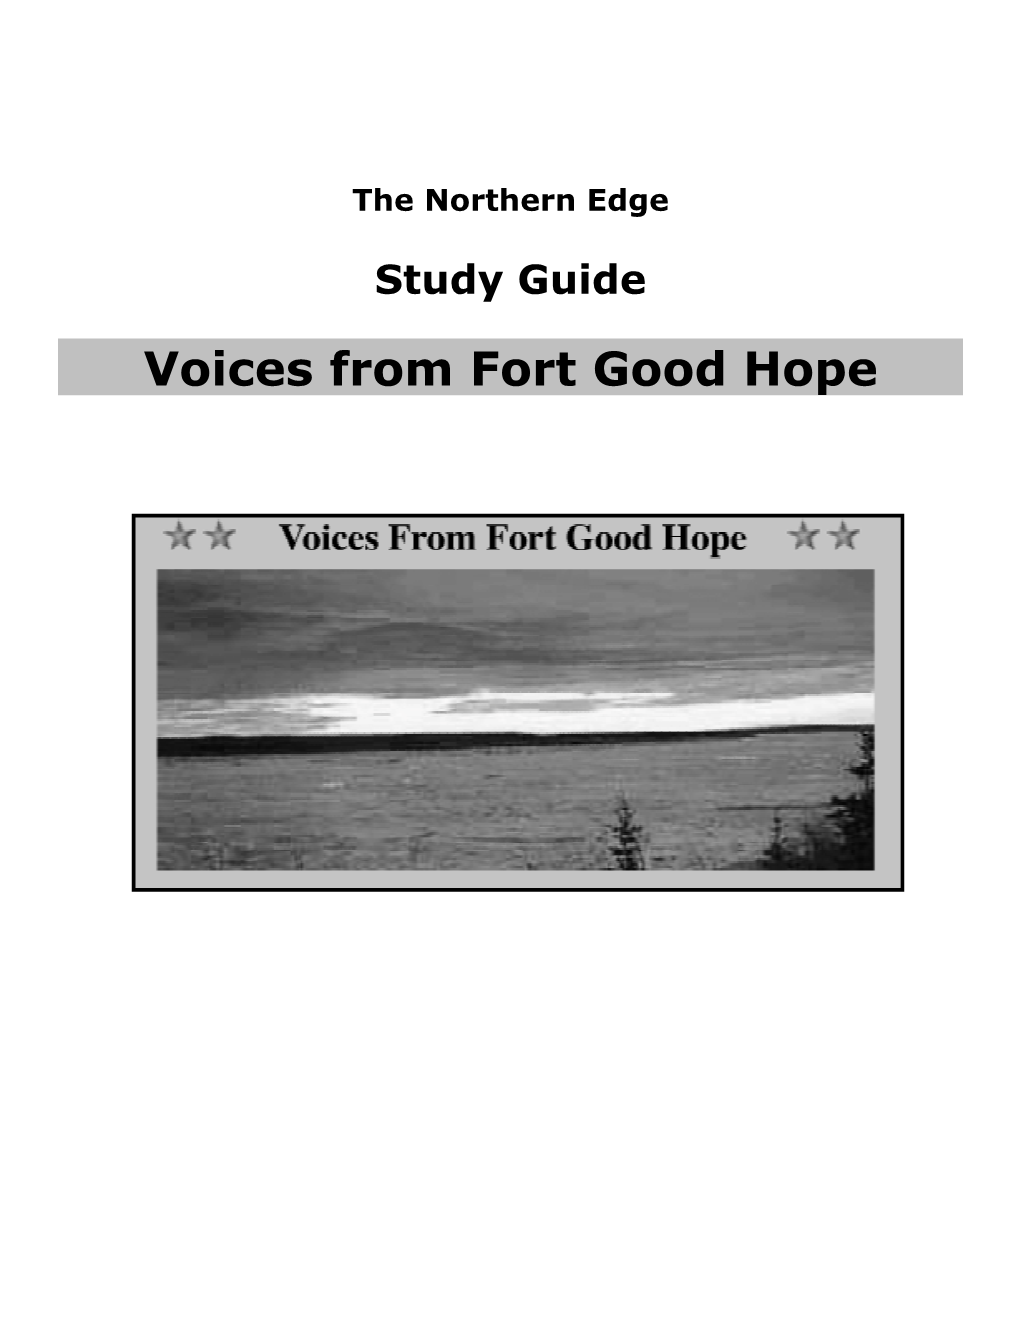 Voices from Fort Good Hope